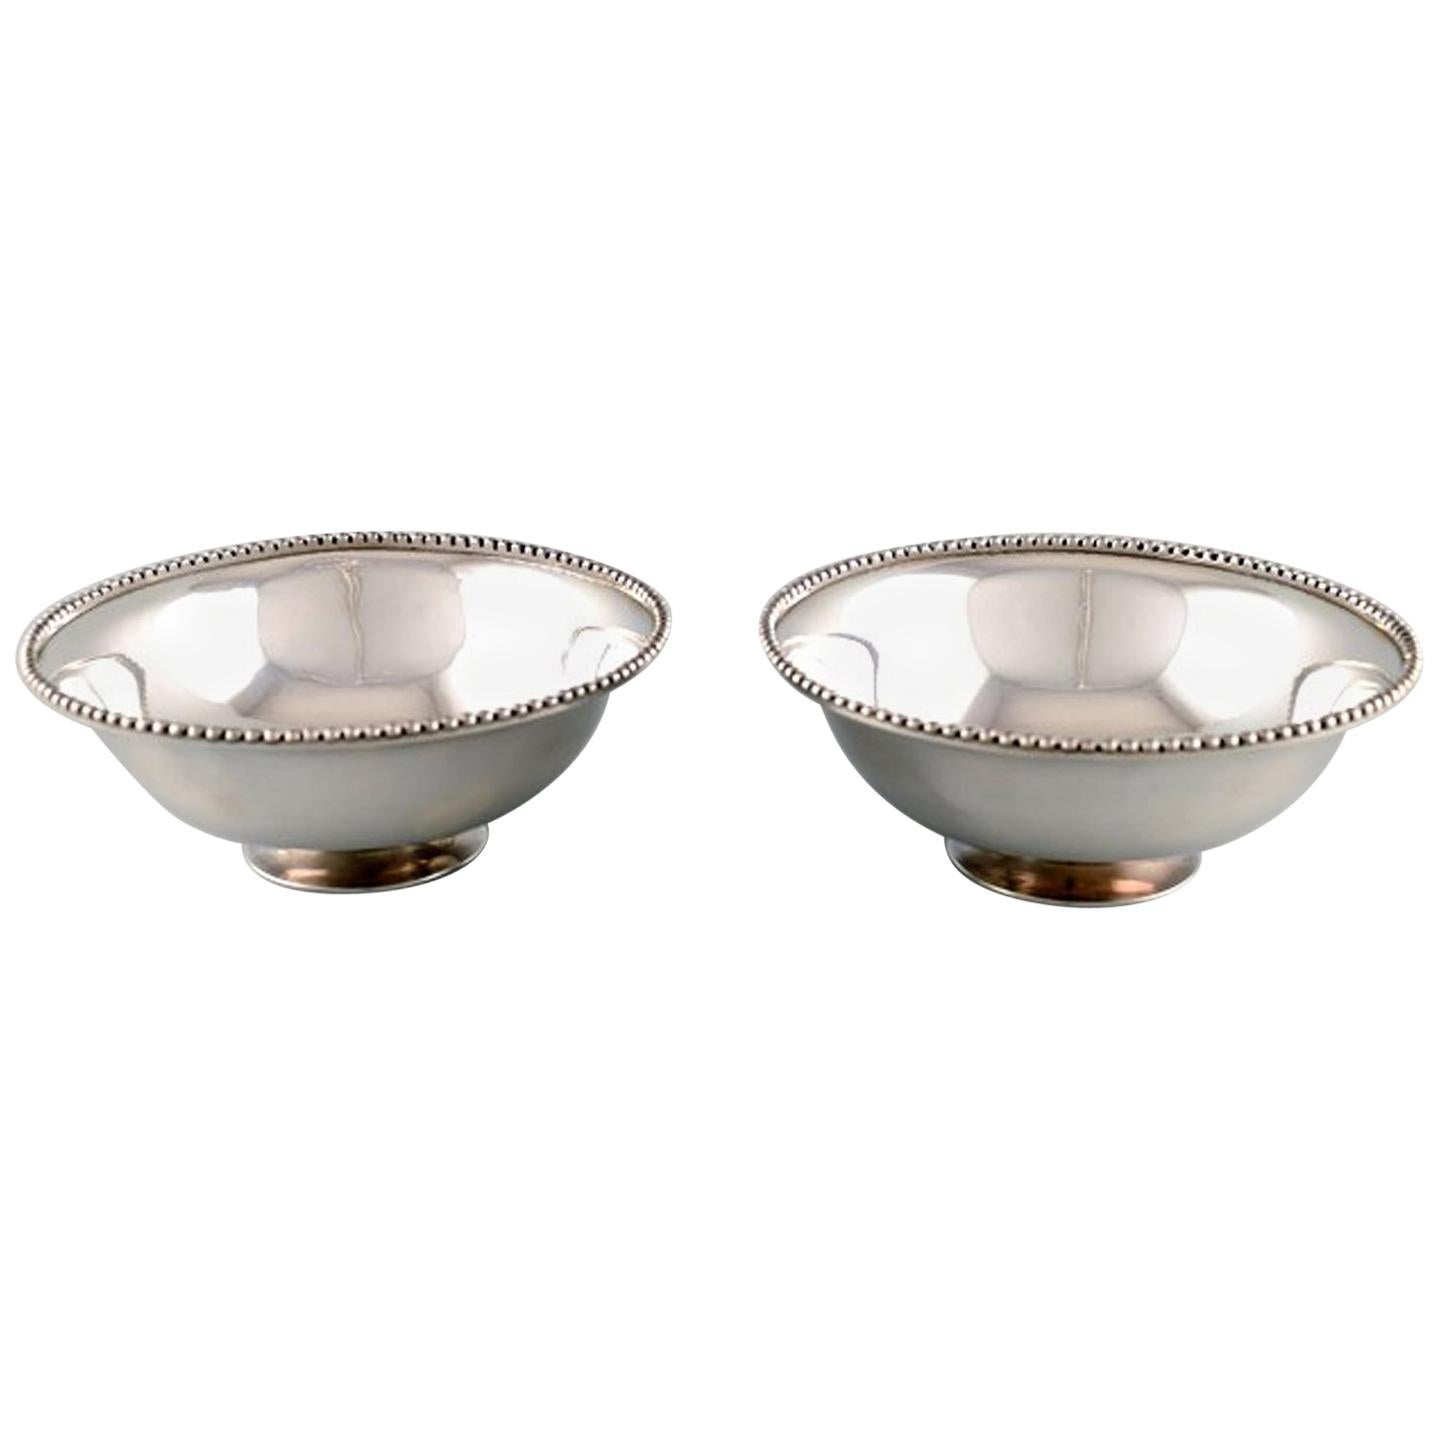 Suzuyo, Pair of Japanese Silver Bowls with Beaded Border